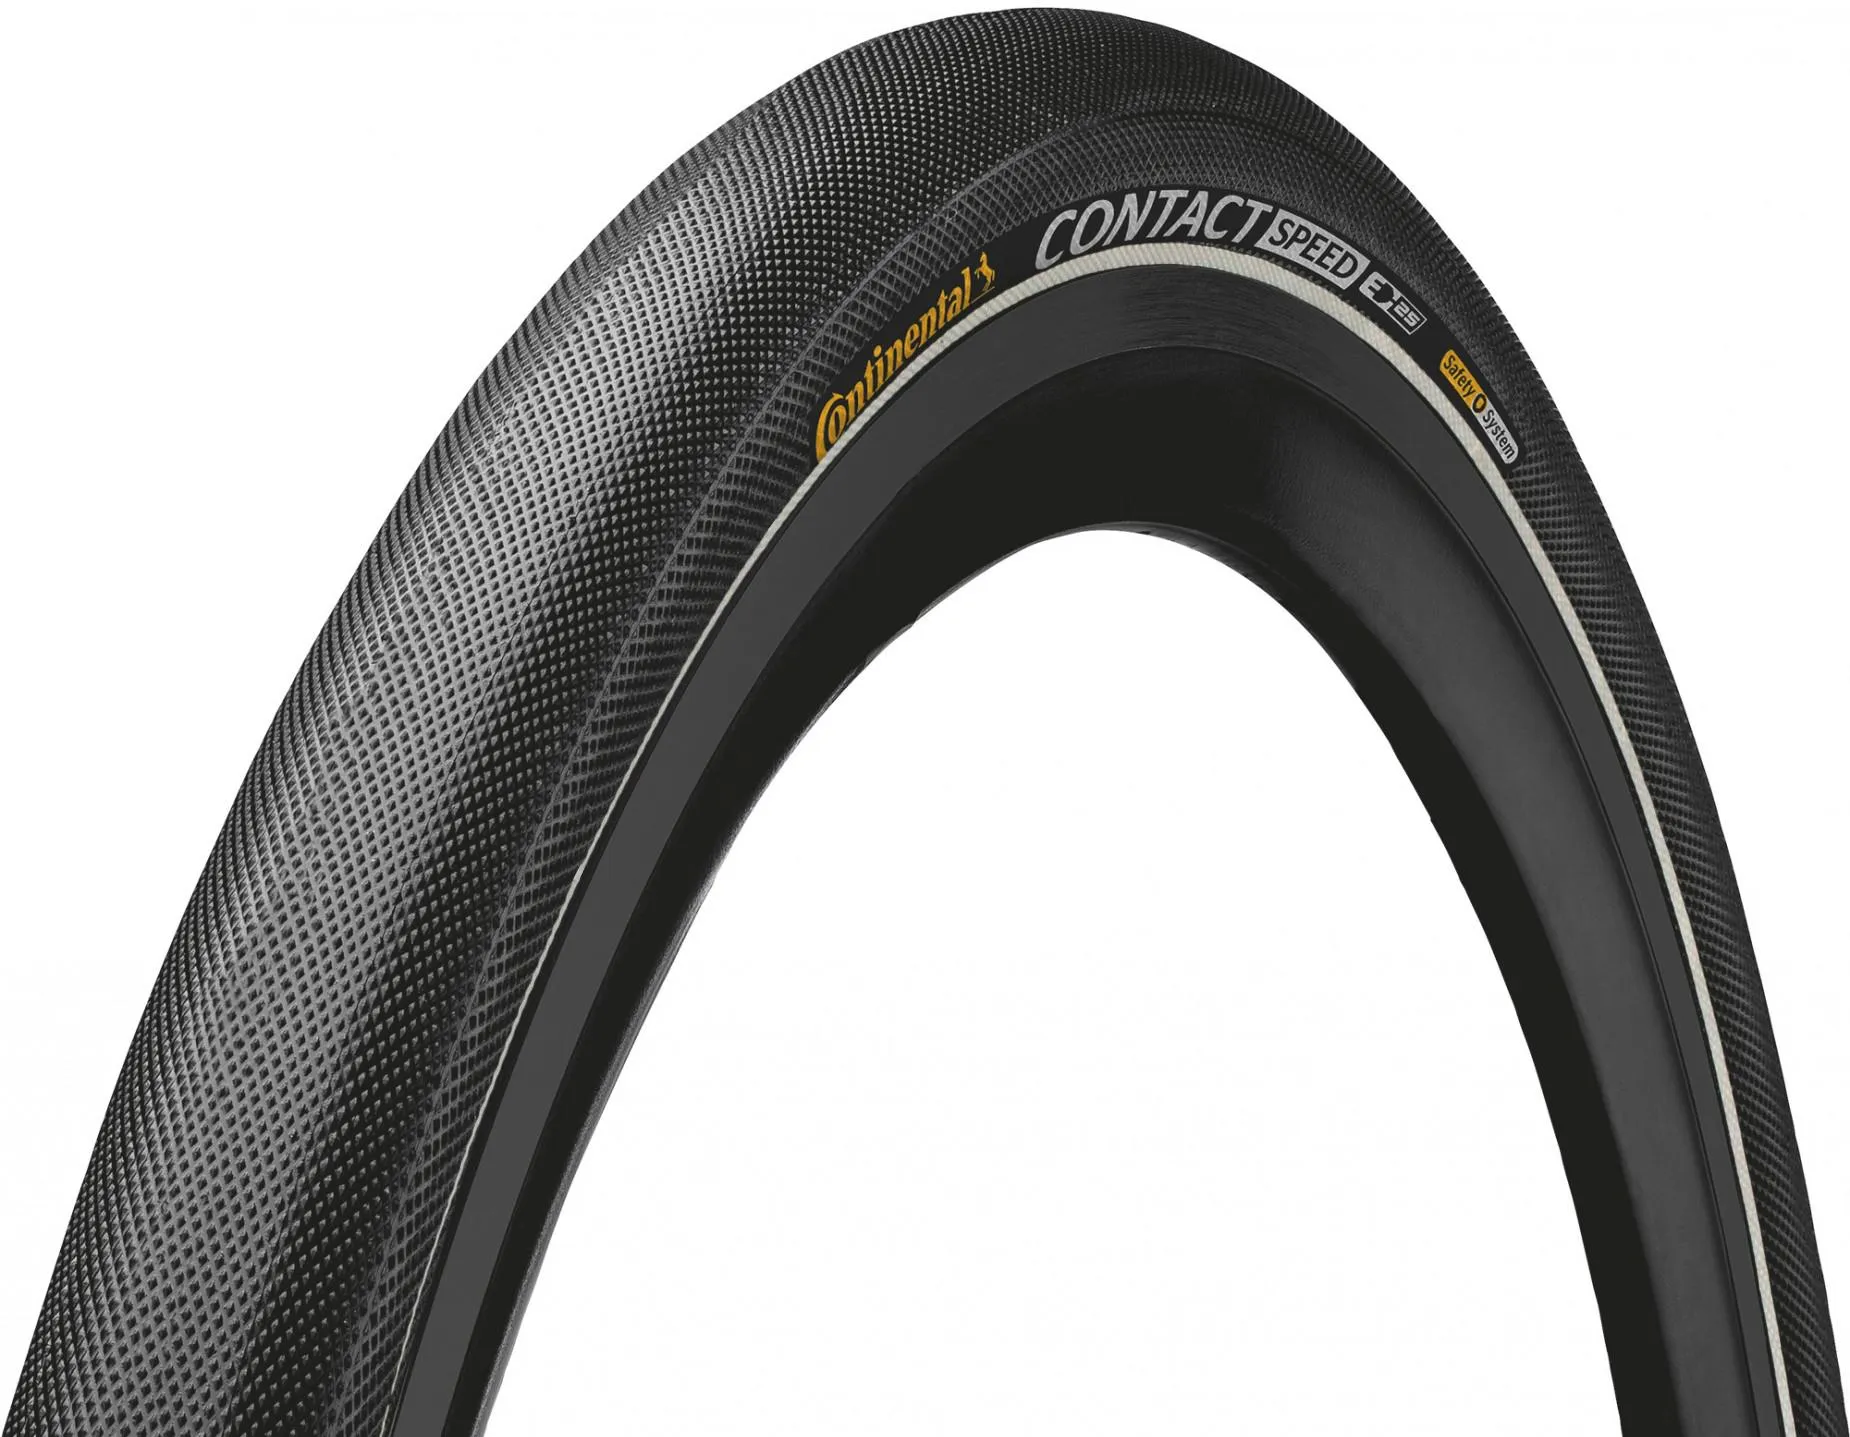  Contact Speed Road Tyre, Black